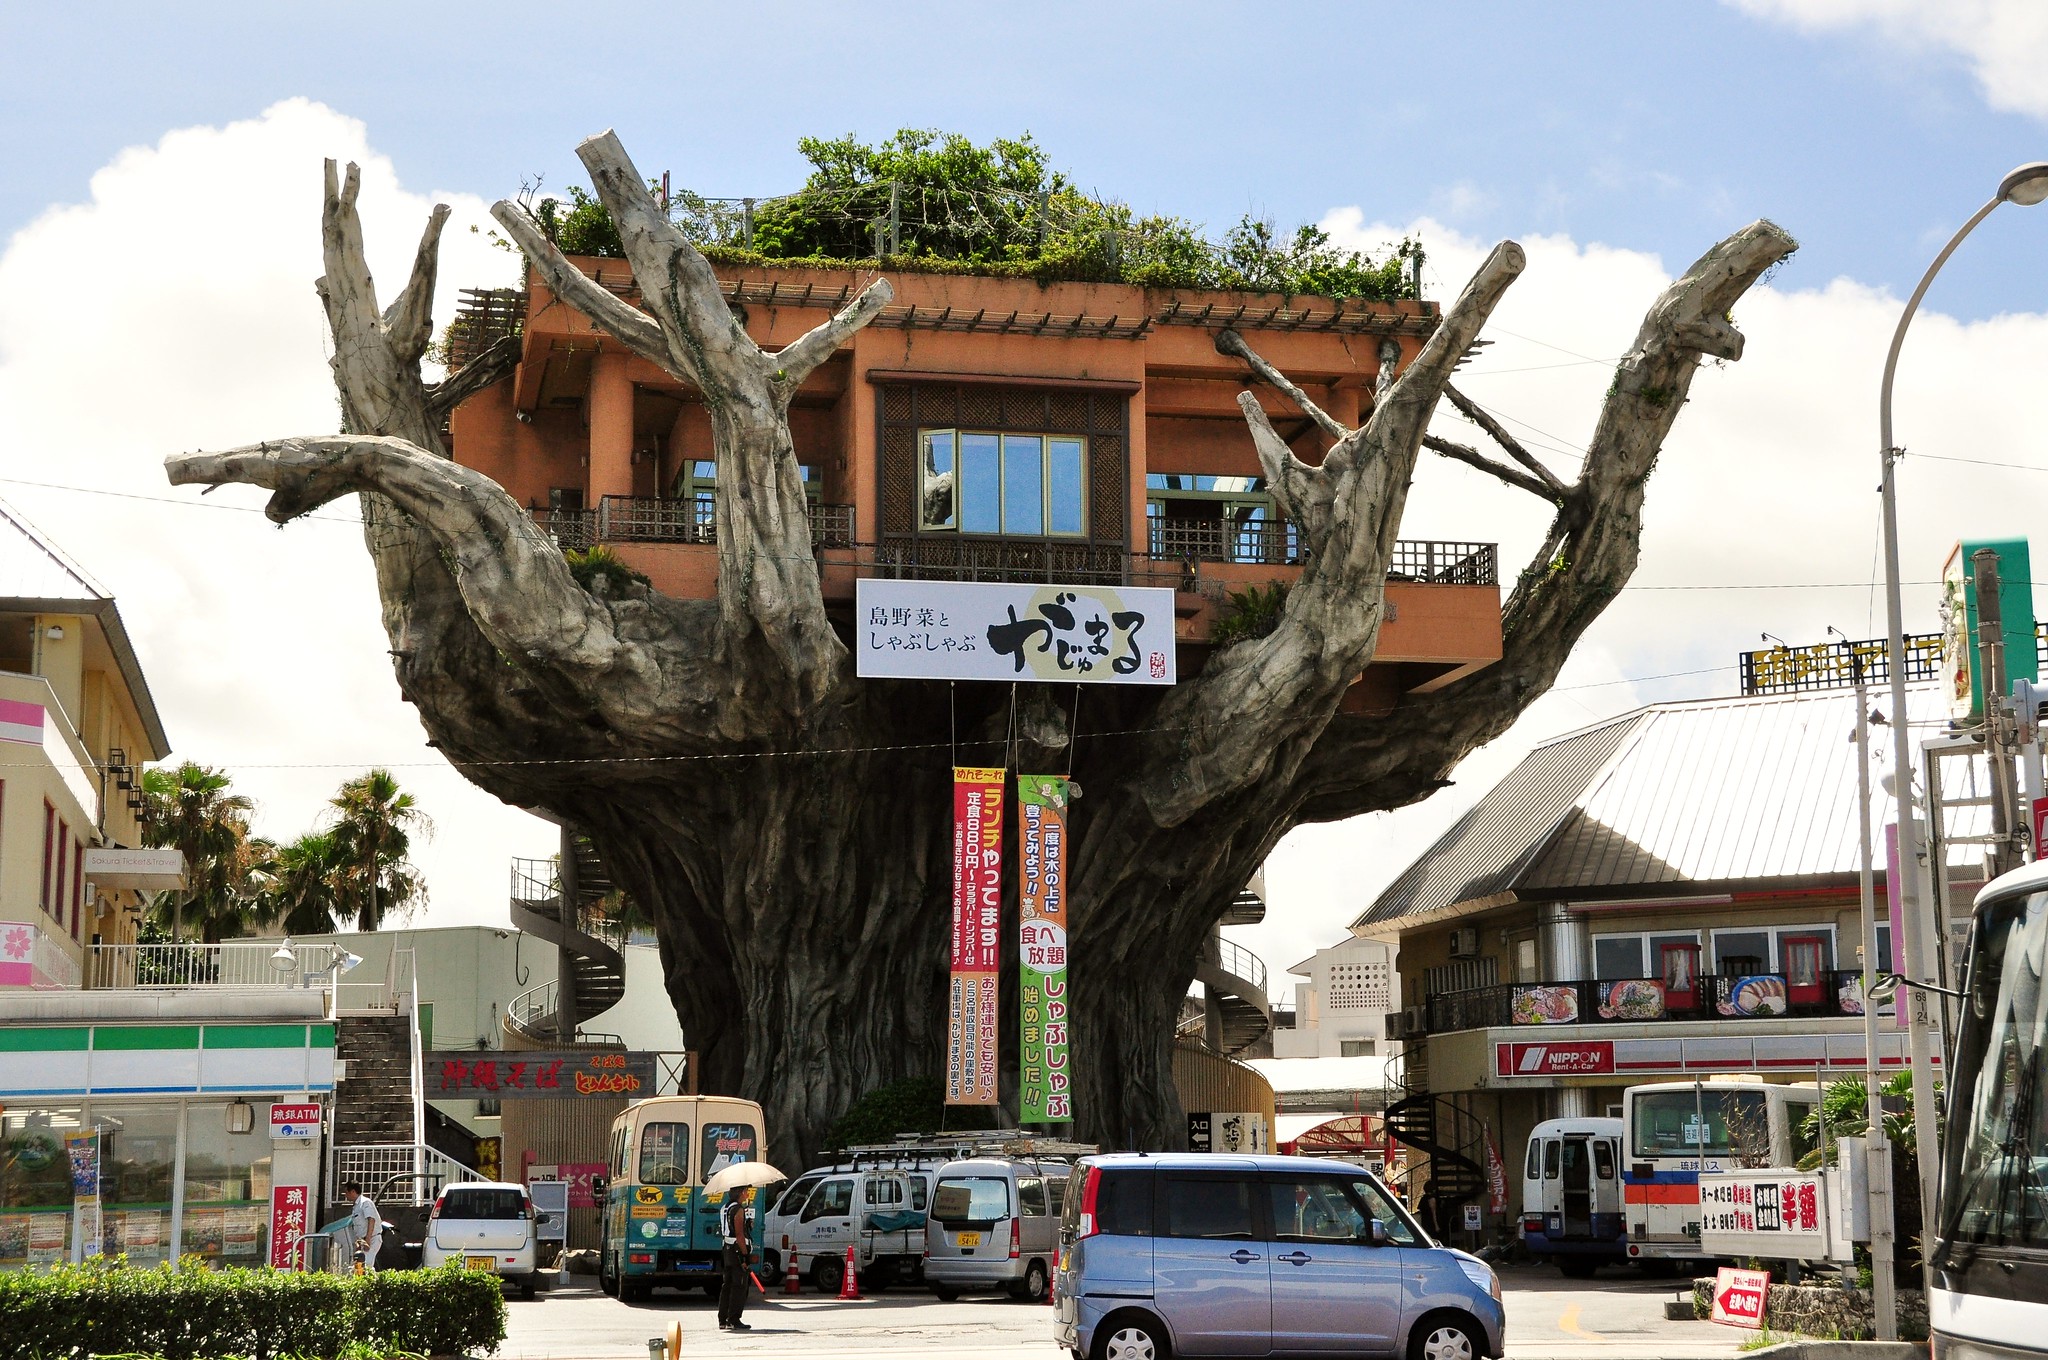 Naha's Treehouse Restaurant  This restaurant is a landmark located on Highway 58 at the entrance to Onoyama Park. Over the years, it has changed names several times. In its present incarnation, its name is "gajumaru", the Okinawan word for the banyan tree. Very appropriate given its location atop a giant banyan.